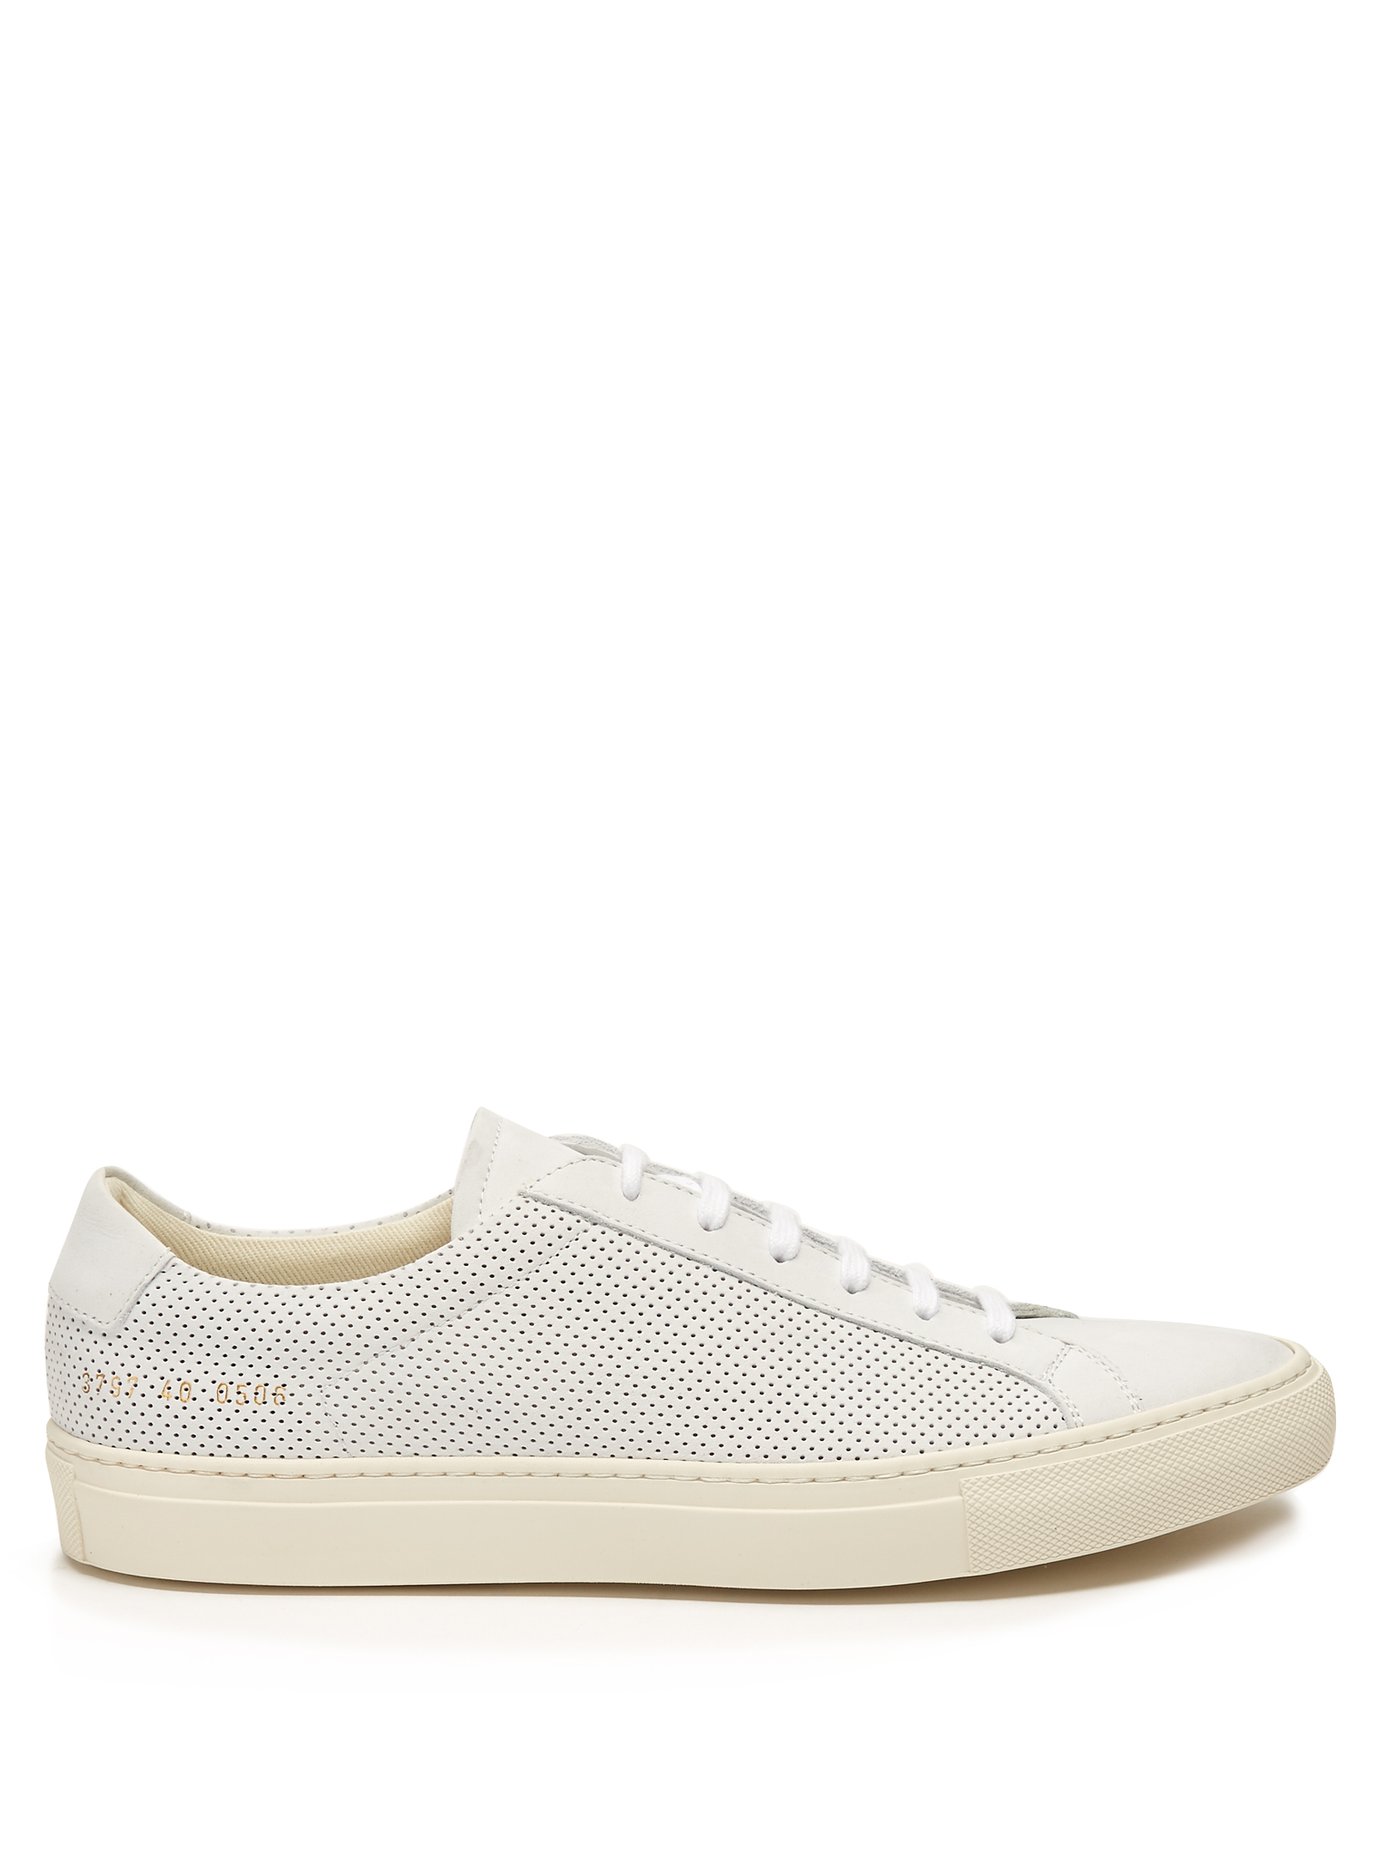 common projects achilles low perforated